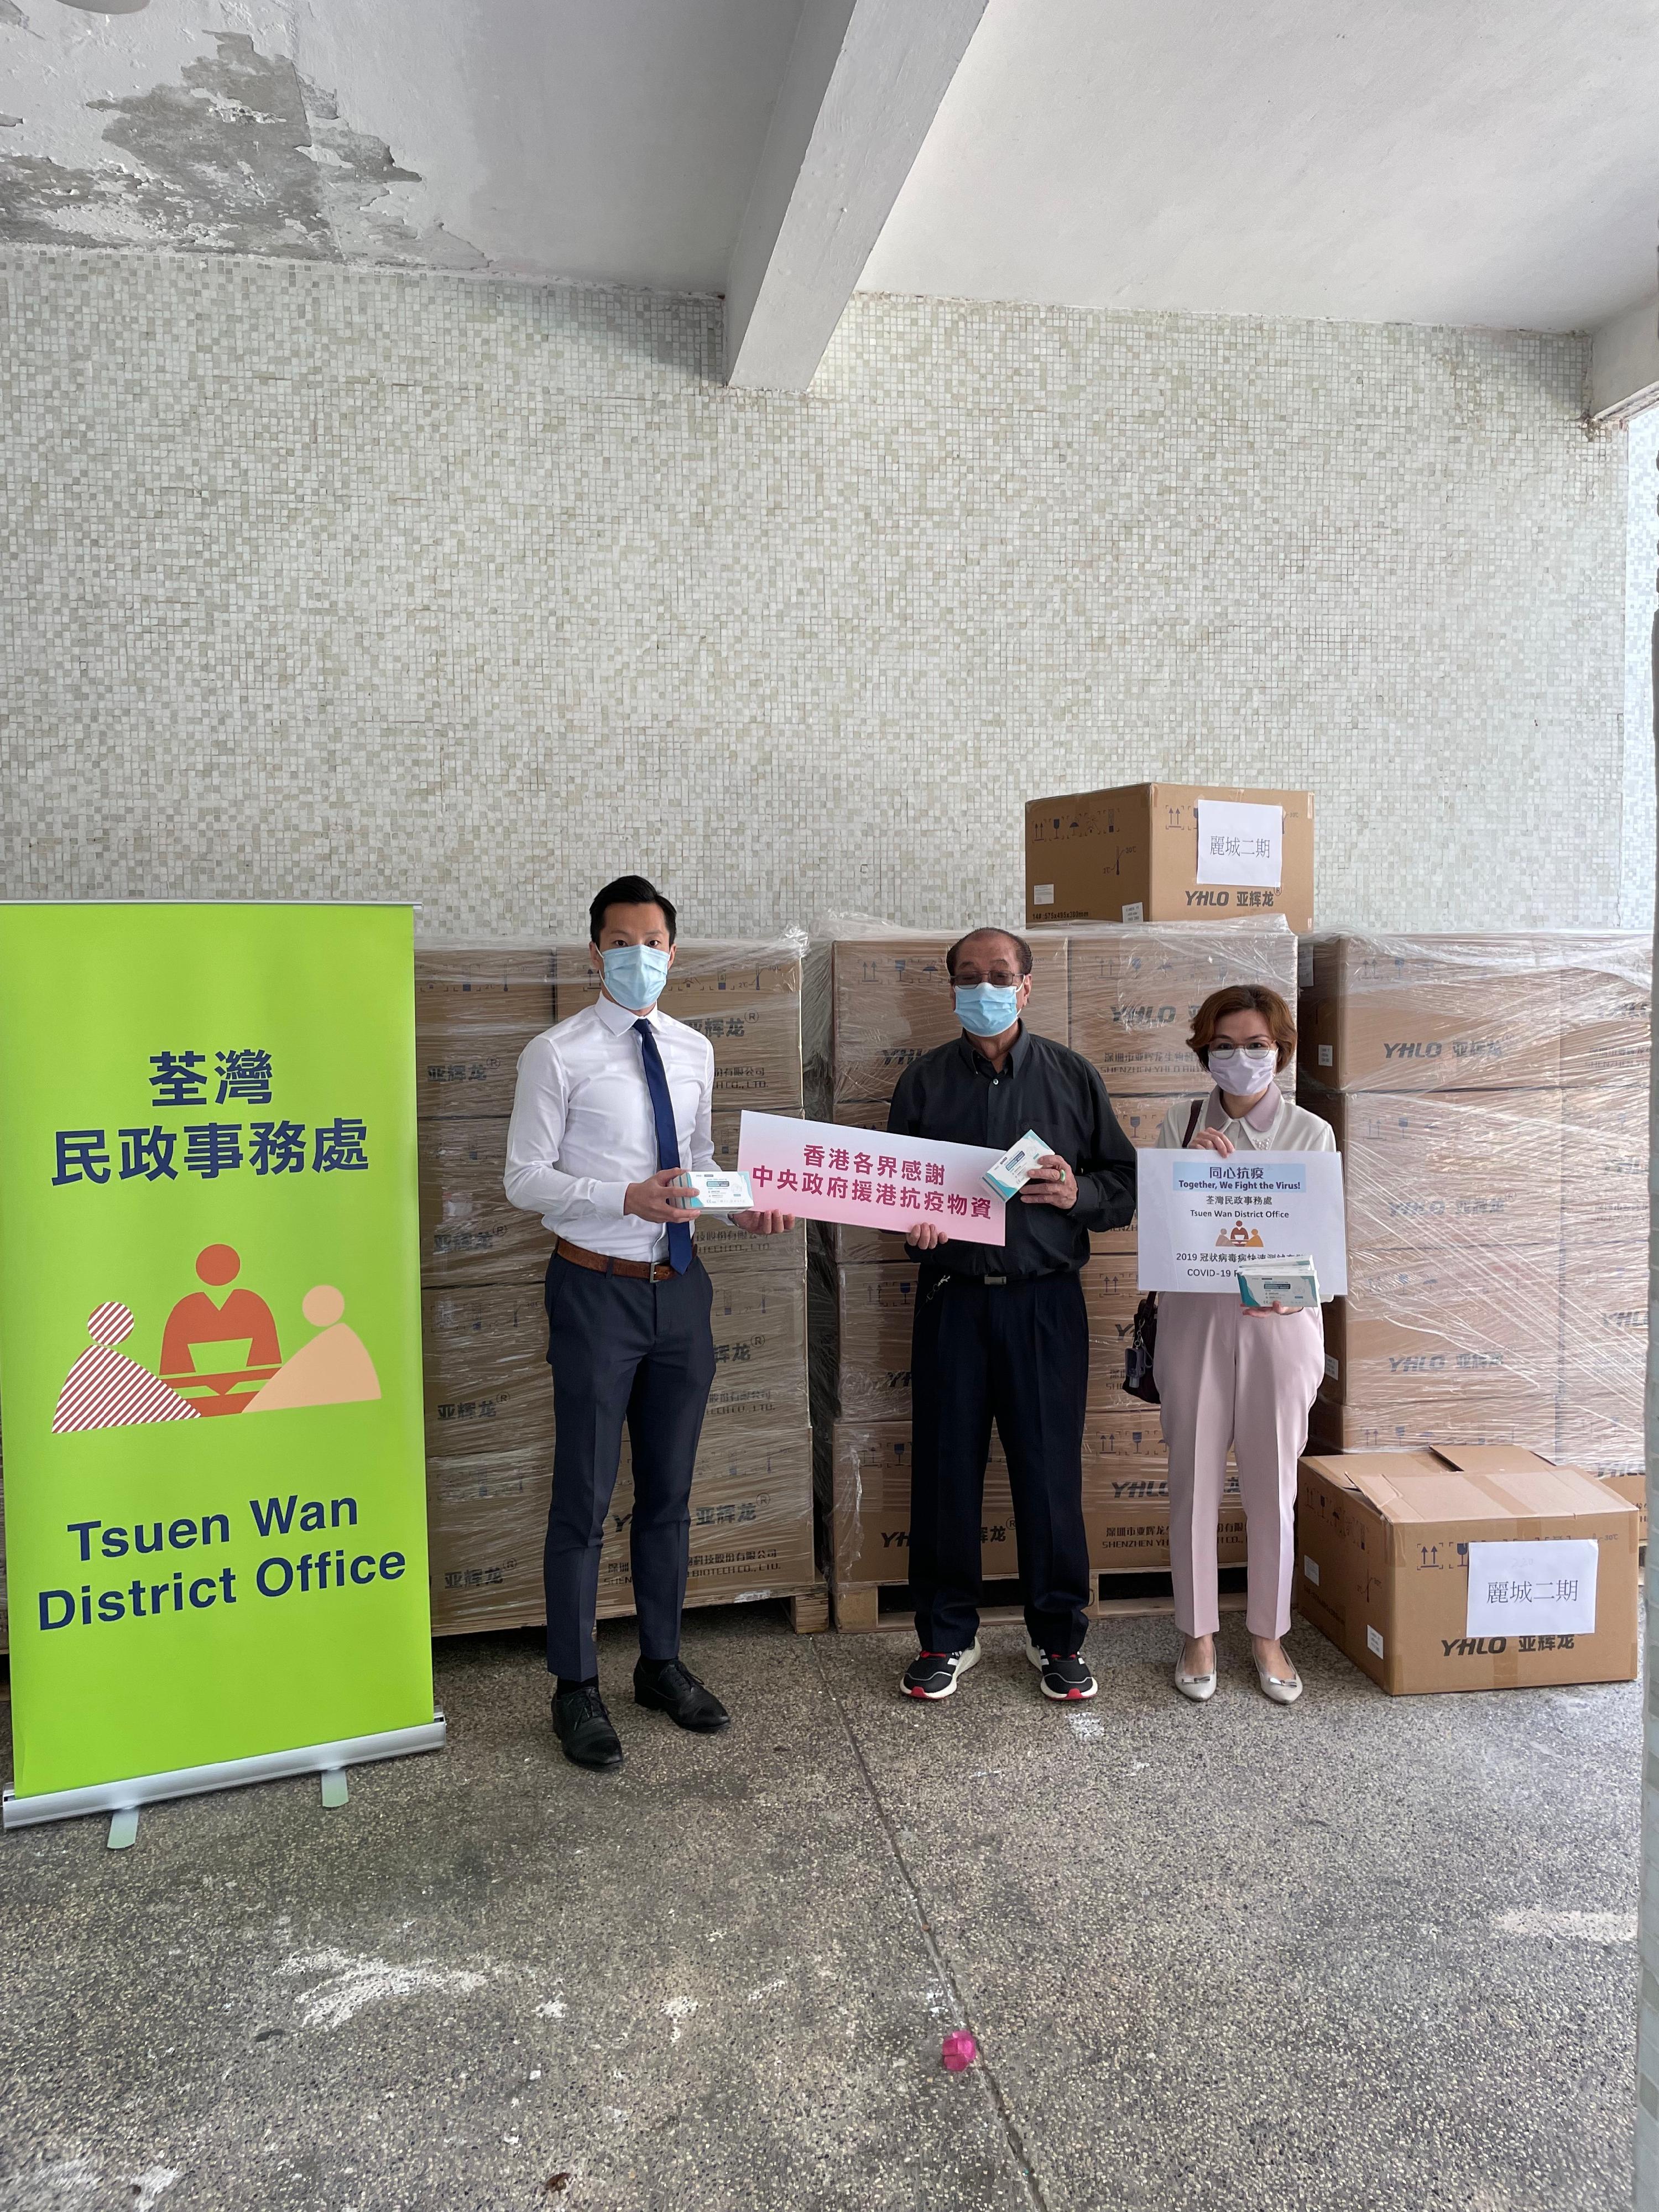 The Tsuen Wan District Office today (May 3) distributed COVID-19 rapid test kits to households, cleansing workers and property management staff living and working in Phase 2 of Belvedere Garden for voluntary testing through the property management company.